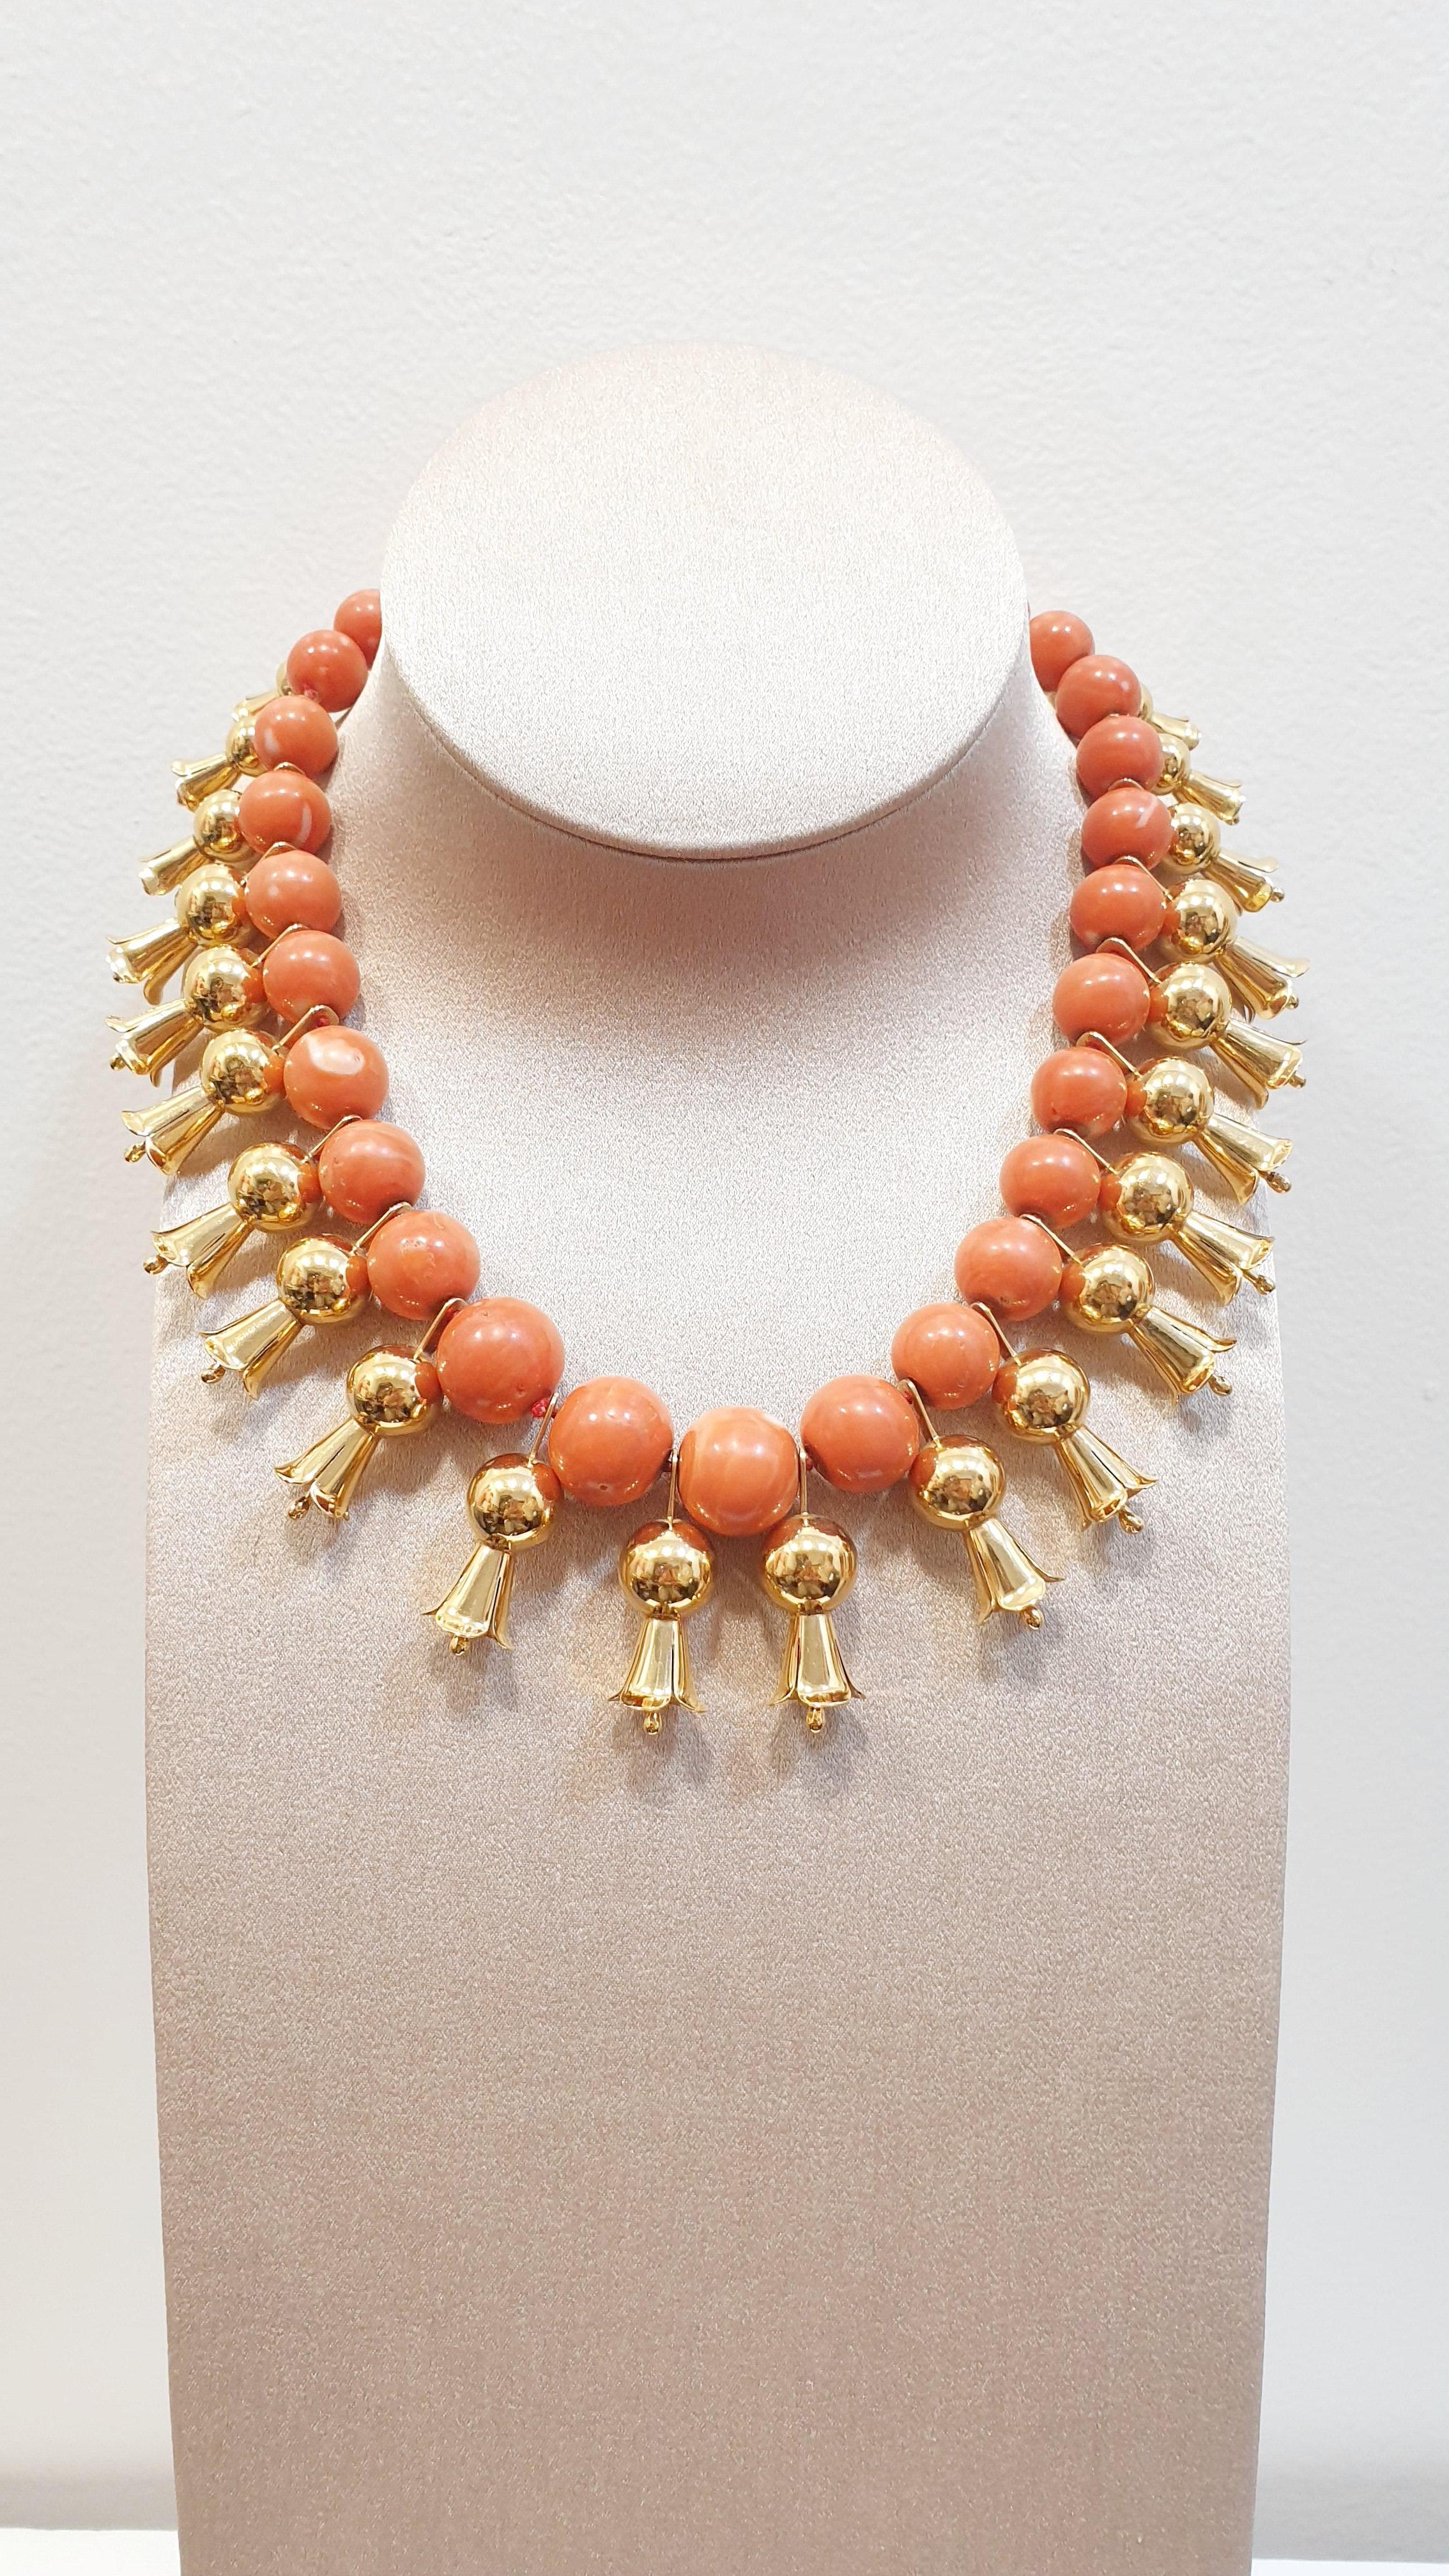 Elegant and statement necklace composed of natural sardinian light coral  showcasing 26 natural round coral beads ranging
17mm  (0,66 in), 14mm (0,55in),  12 (0,47in) mm 
Necklace lenght 44mm / 17,32 inches
Weight 250 grams 
Manufacture of 21